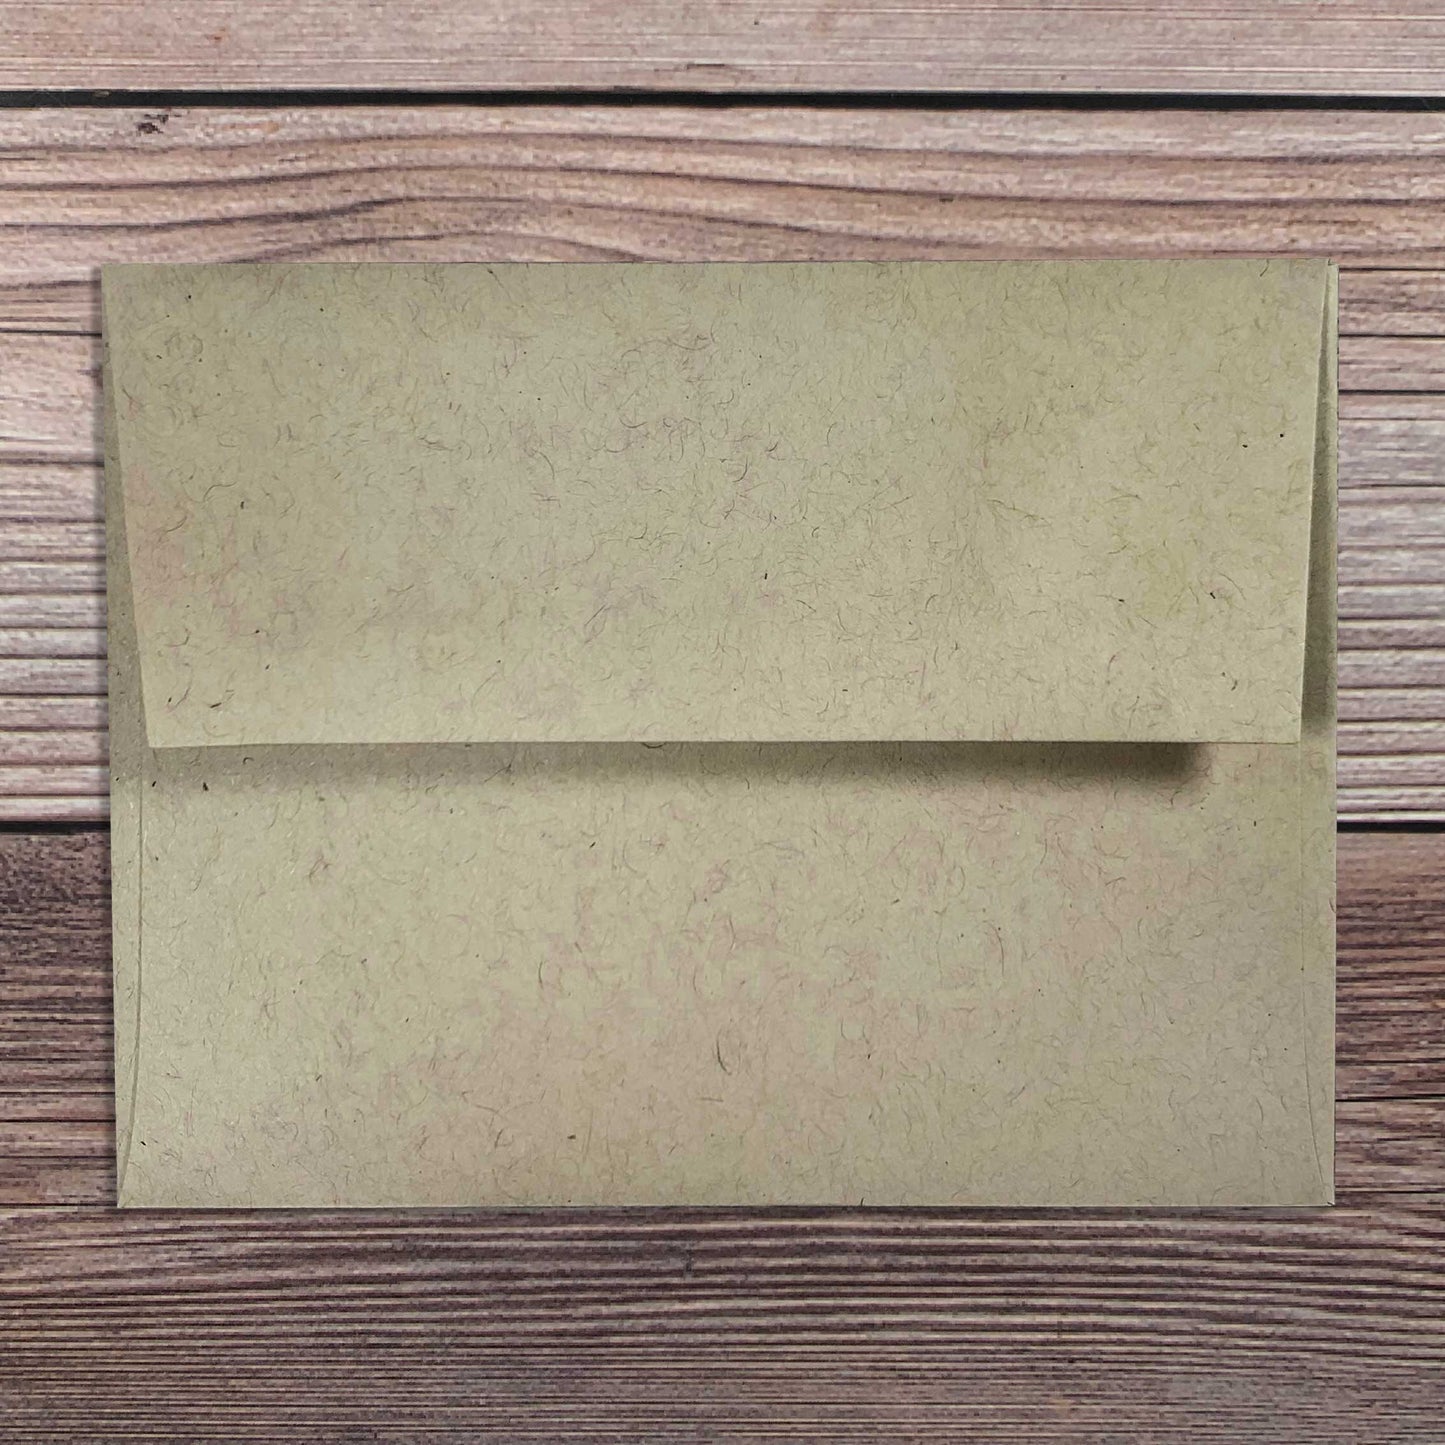 Greeting Card envelope, kraft color, square flap, included with letterpress Mother's Day card.